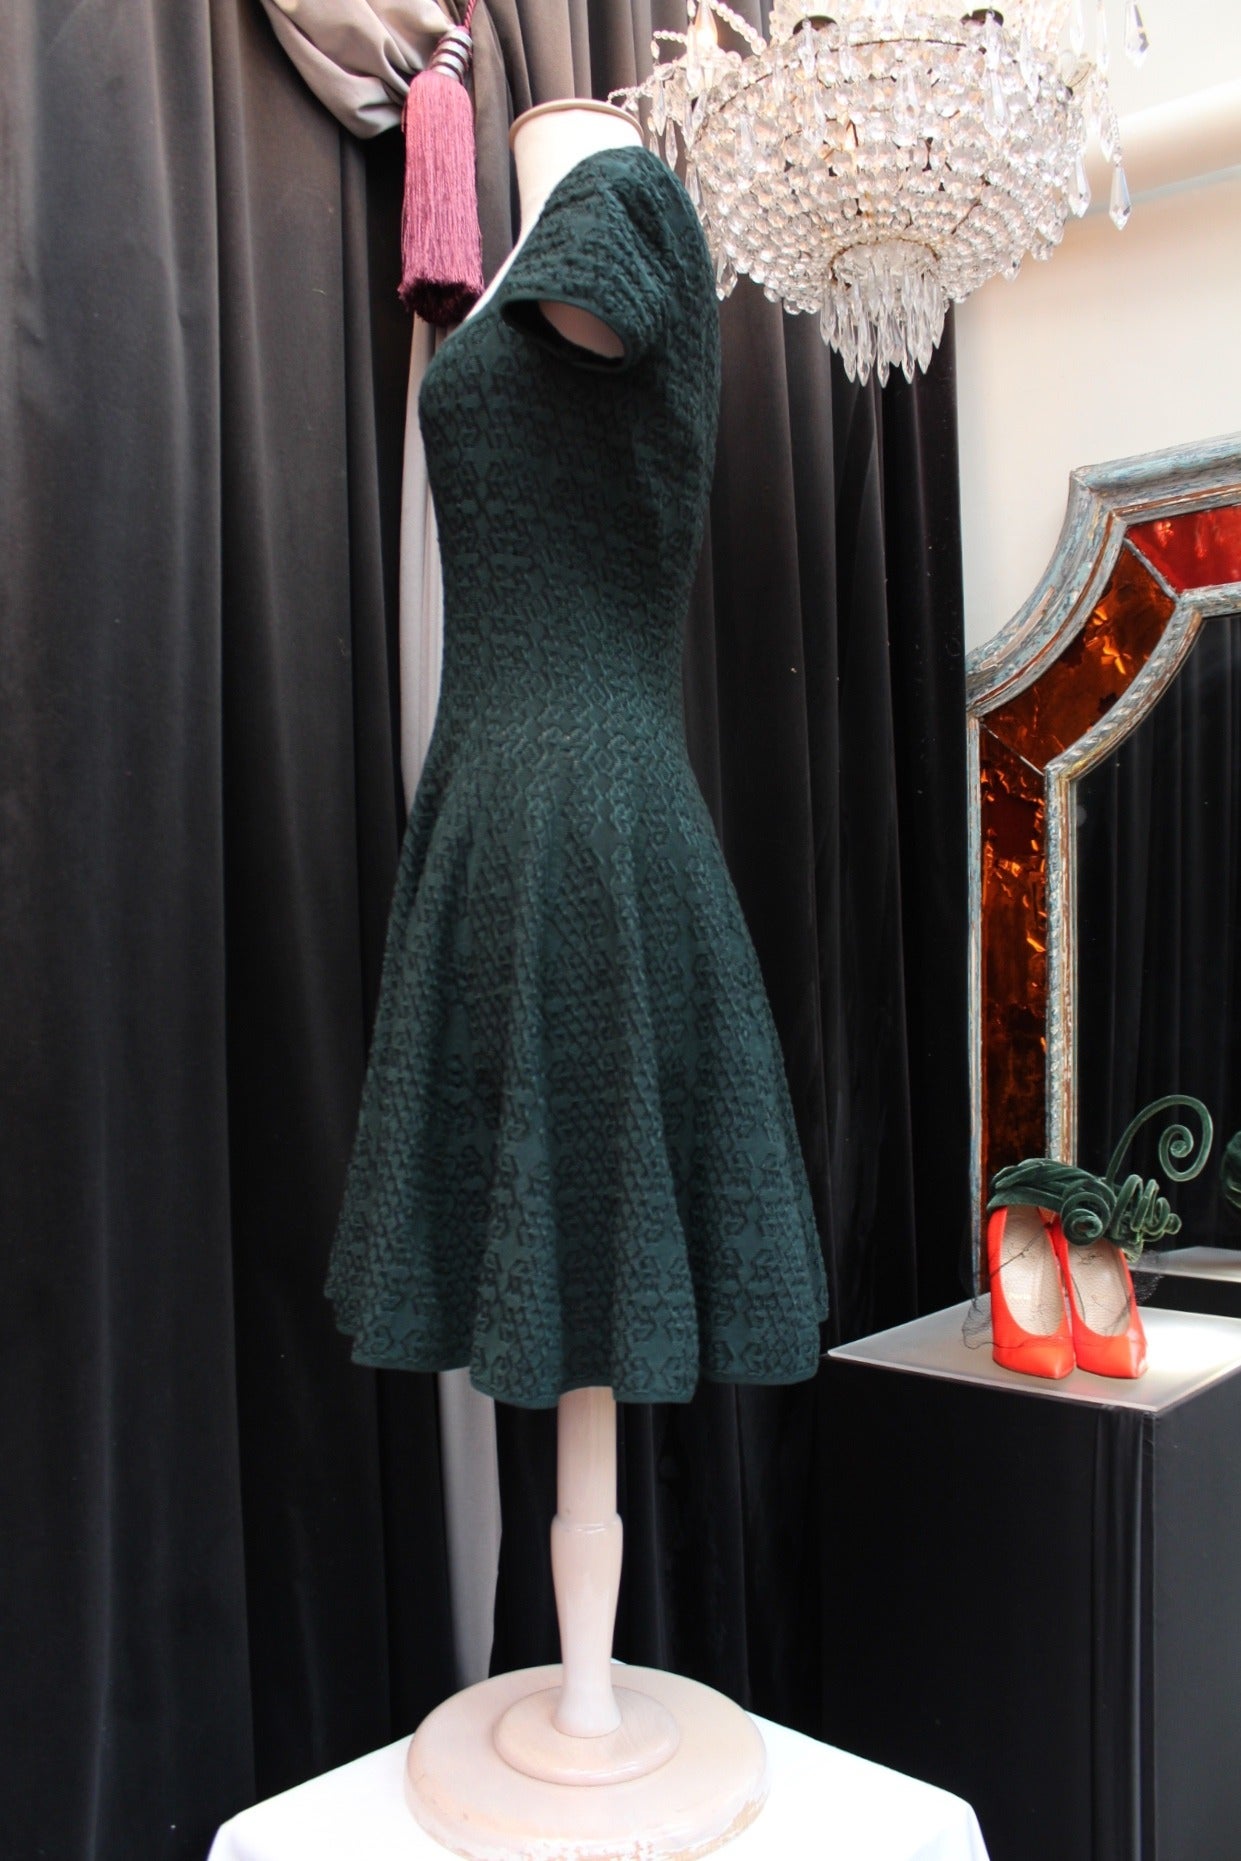 ALAIA (Paris) Short sleeves skater dress composed of dark green and black knitted rayon cotton. 

Black inner lining. Closes with a zip in the back.

Size indicated 38FR - 6US

Excellent condition

Sizes: 
Length: 89 cm
Shoulders: 40